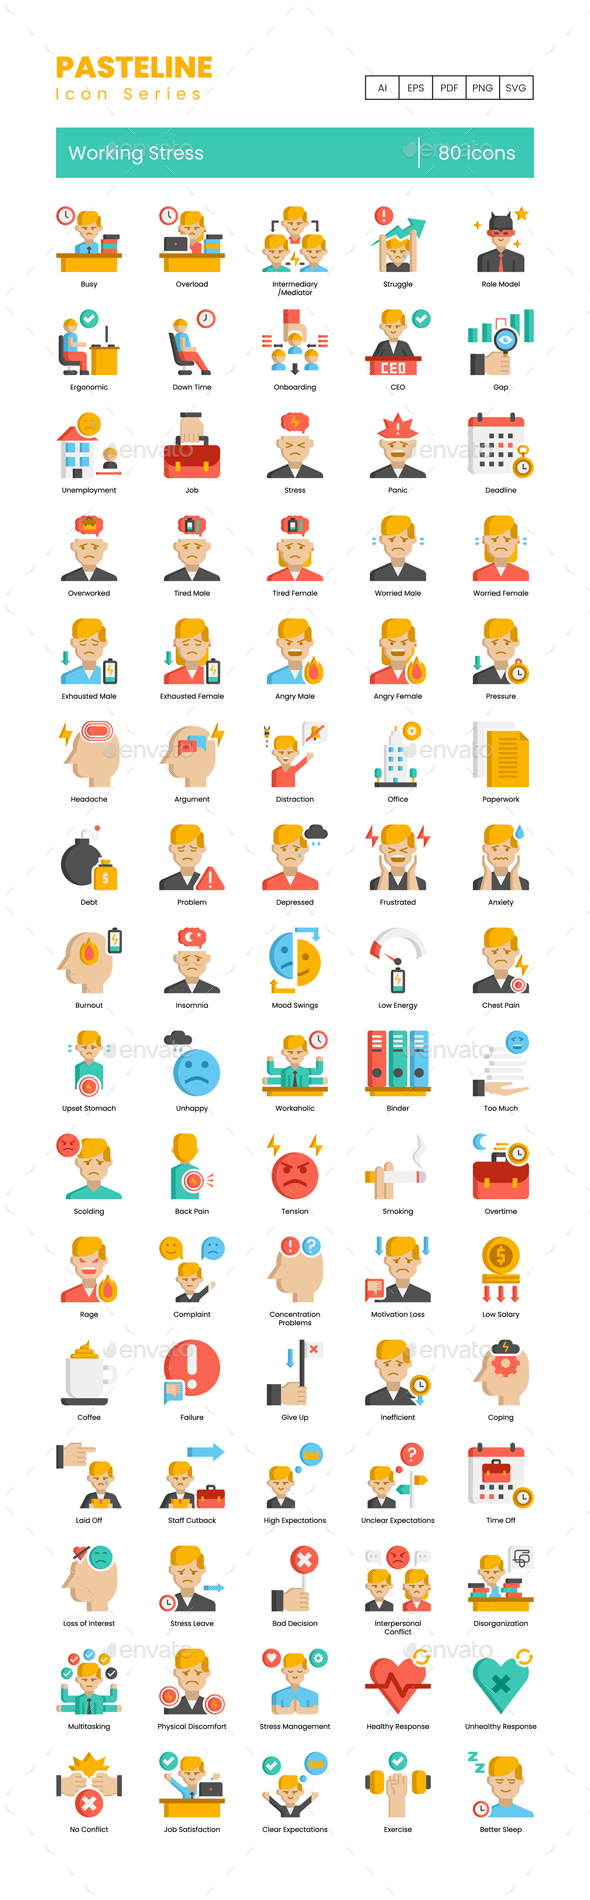 [DOWNLOAD]80 Working Stress Icons | Pasteline Series